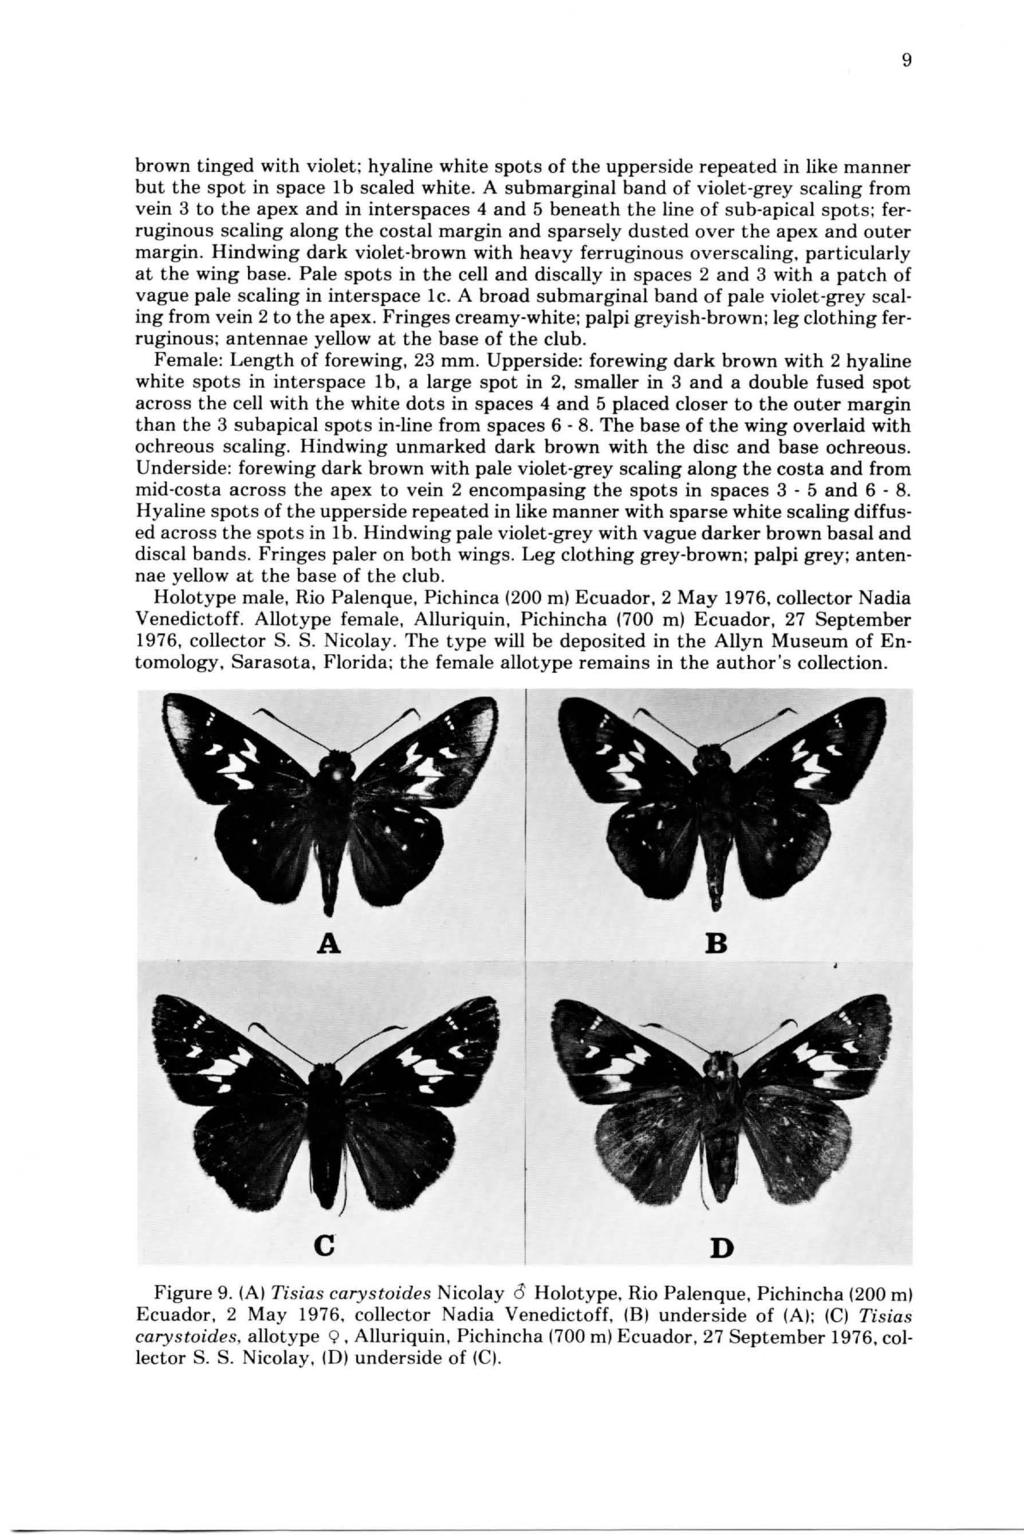 9 brown tinged with violet; hyaline white spots of the upperside repeated in like manner but the spot in space 1 b scaled white.